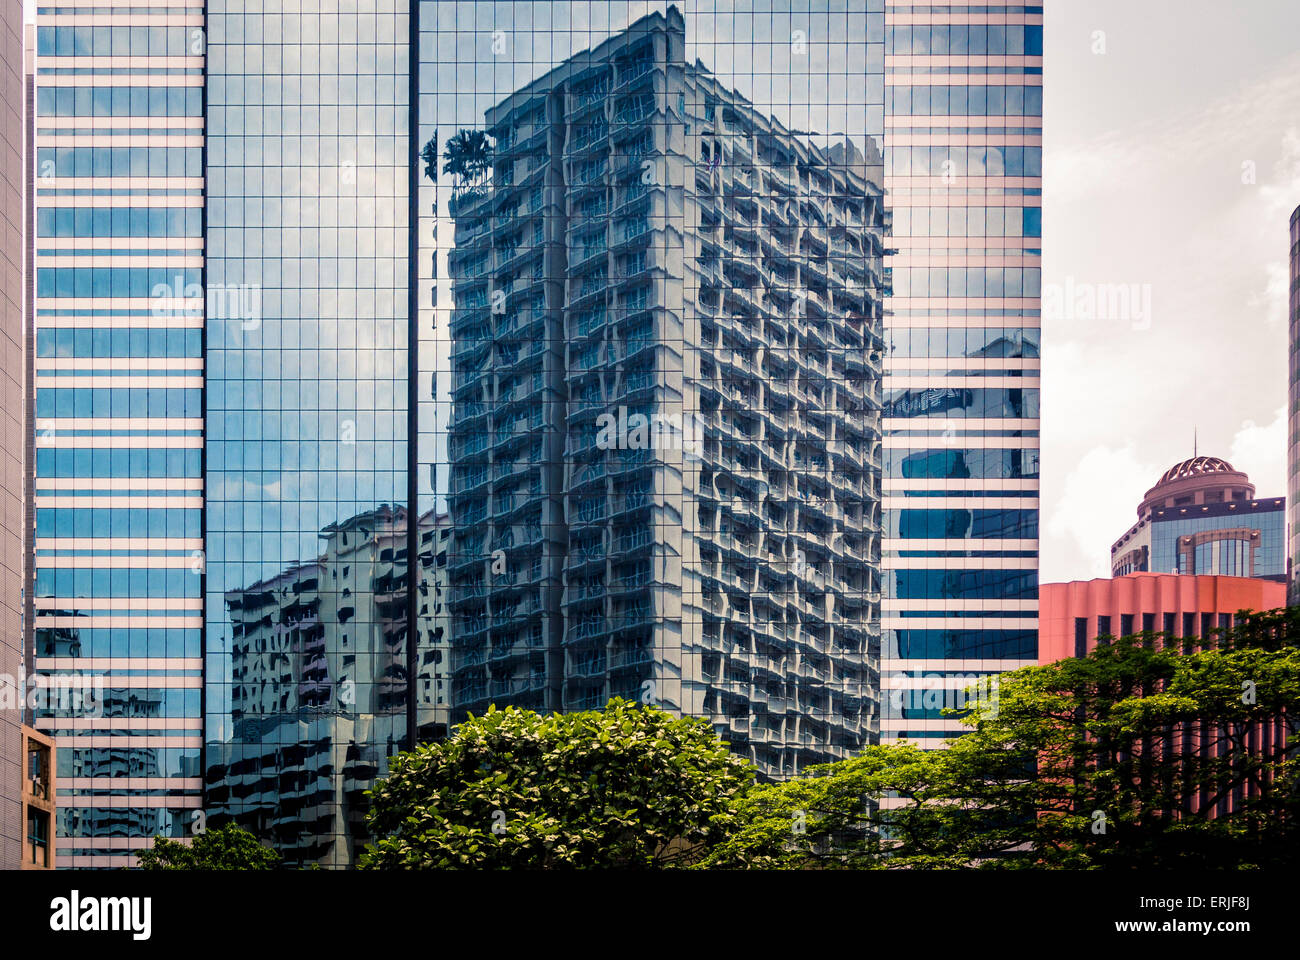 High-rise building reflections on another building. Kuala Lumpur, Malaysia. Stock Photo